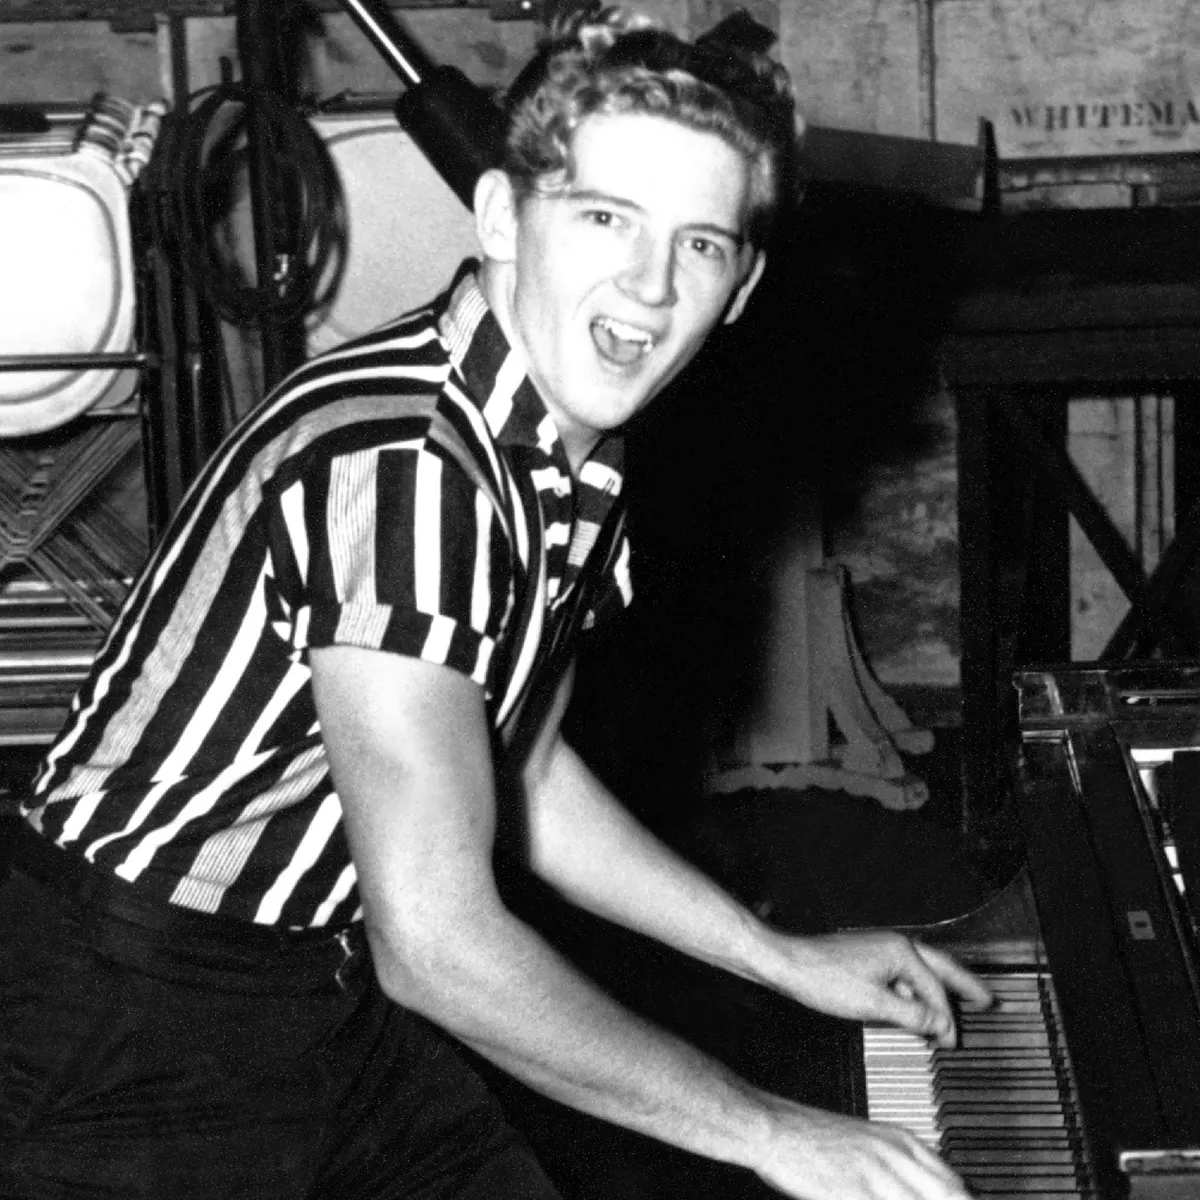 Ron's Golden Oldies Featuring Jerry Lee Lewis